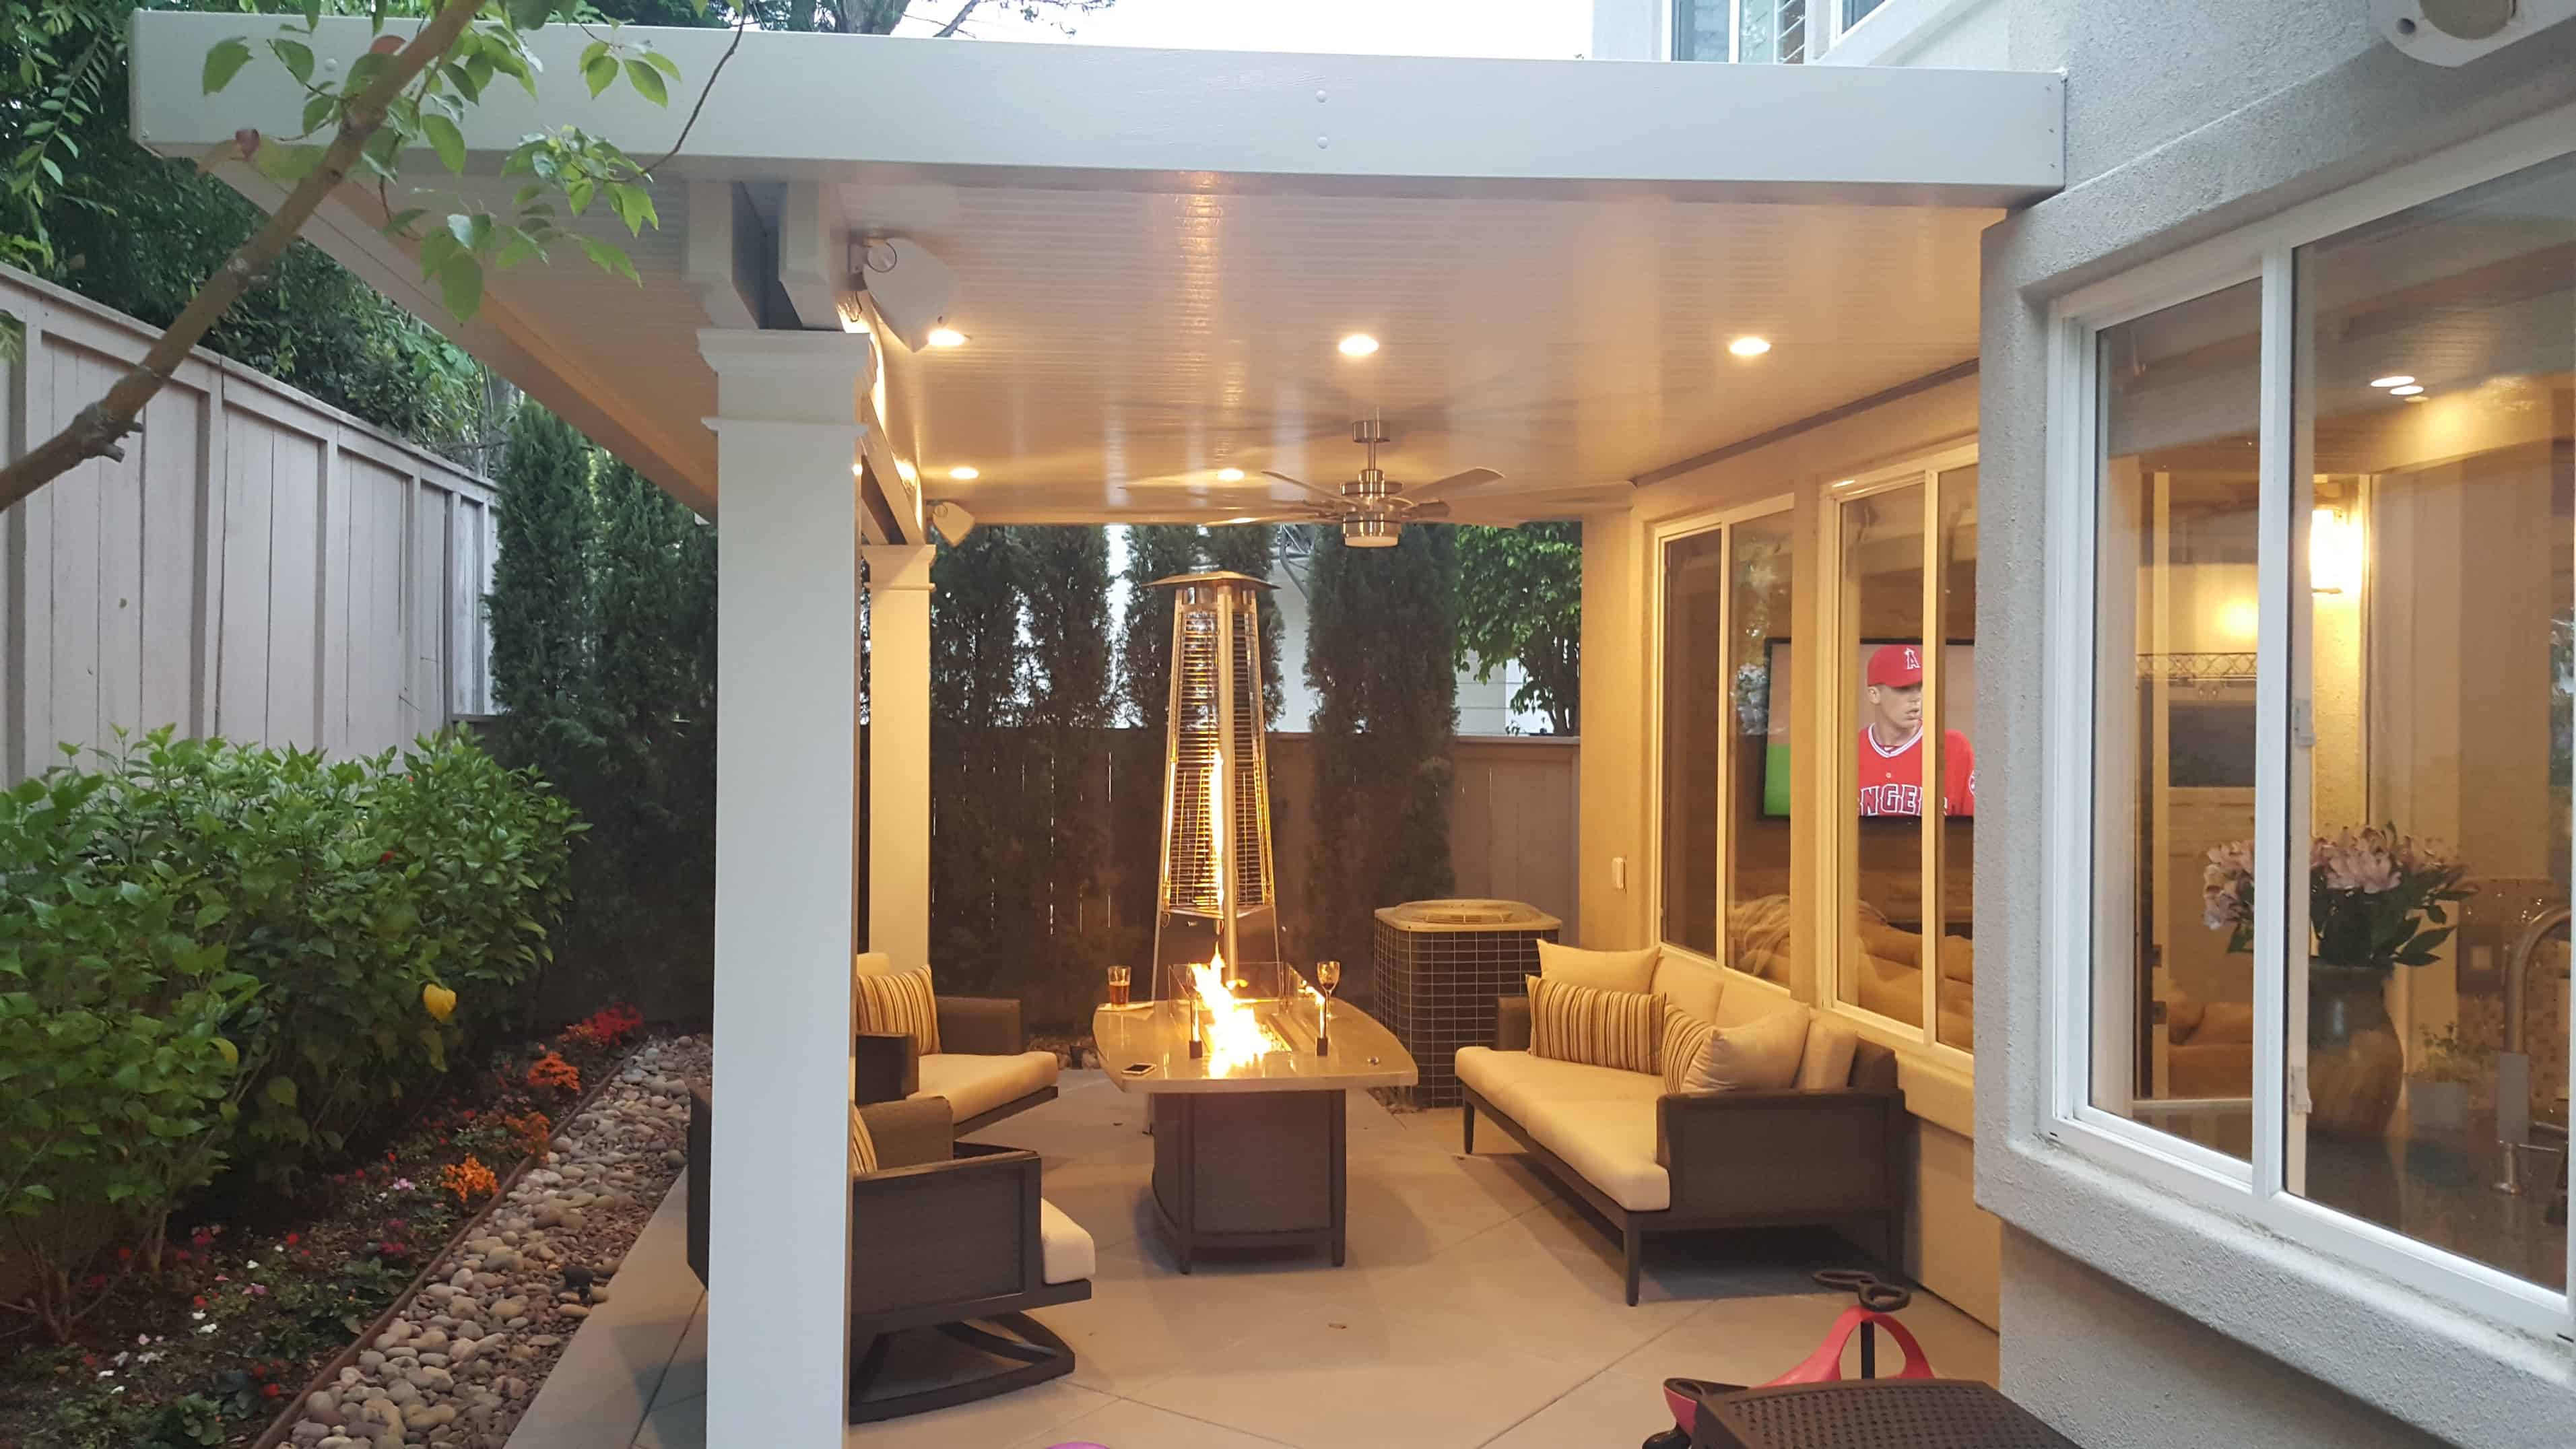 Patio Covers She Shed Design Ideas In Orange County Ca